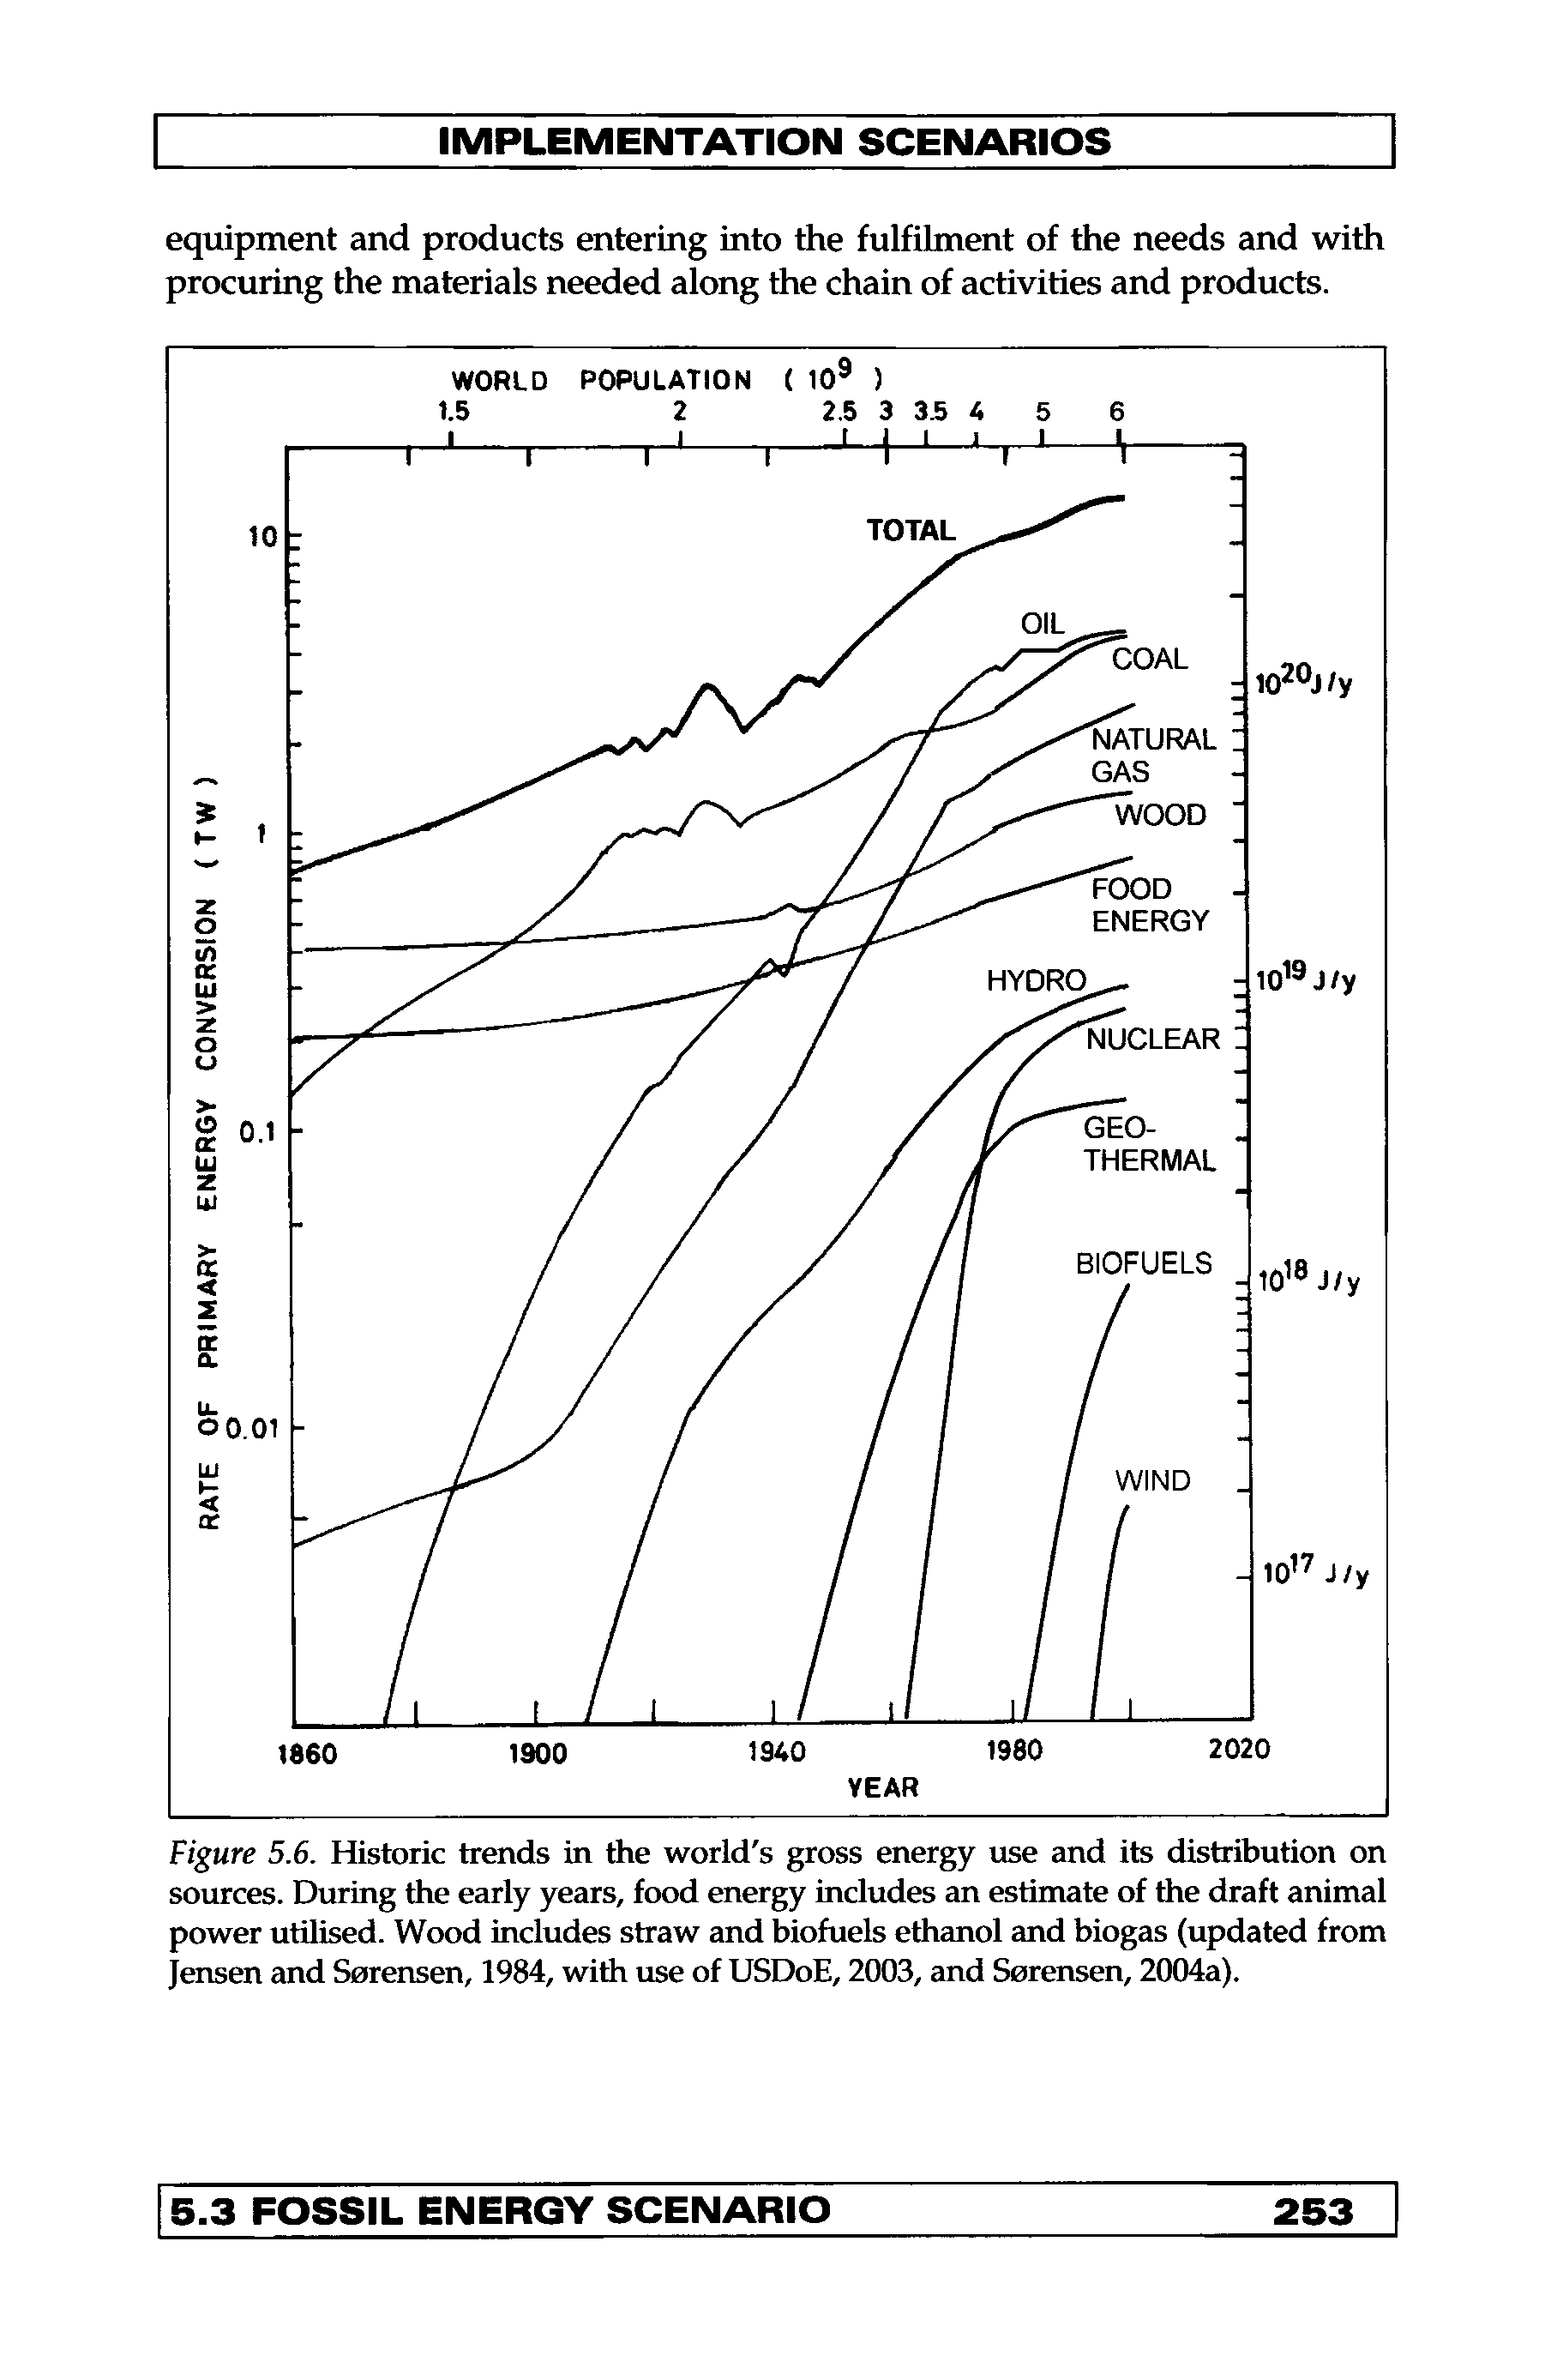 Figure 5.6. Historic trends in the world s gross energy use and its distribution on sources. During the early years, food energy includes an estimate of the draft animal power utilised. Wood includes straw and biofuels ethanol and biogas (updated from Jensen and Sorensen, 1984, with use of USDoE, 2003, and Sorensen, 2004a).